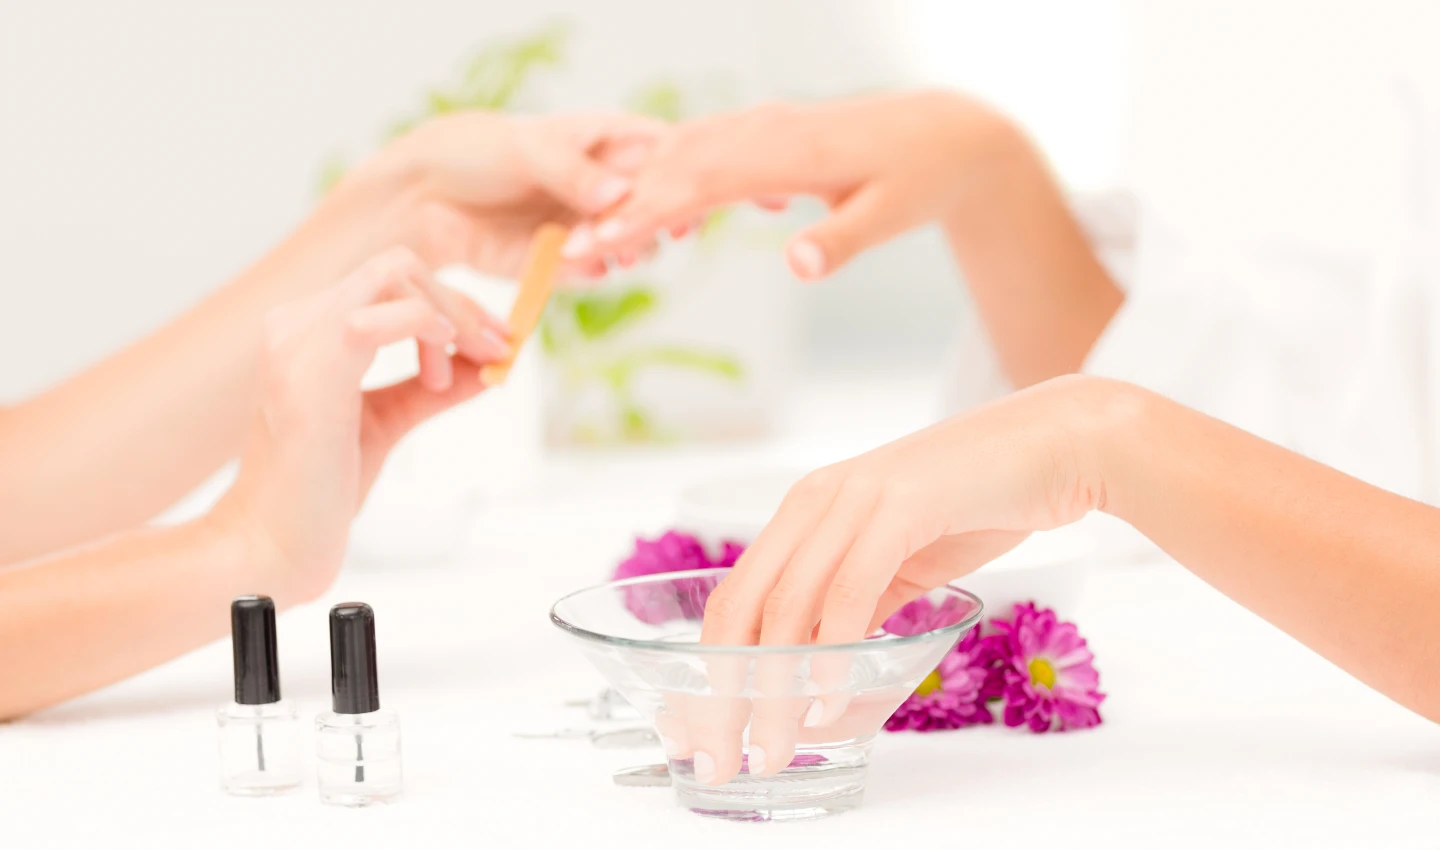 A woman's hand receives a natural nail treatment during a manicure session, surrounded by various natural nail products.